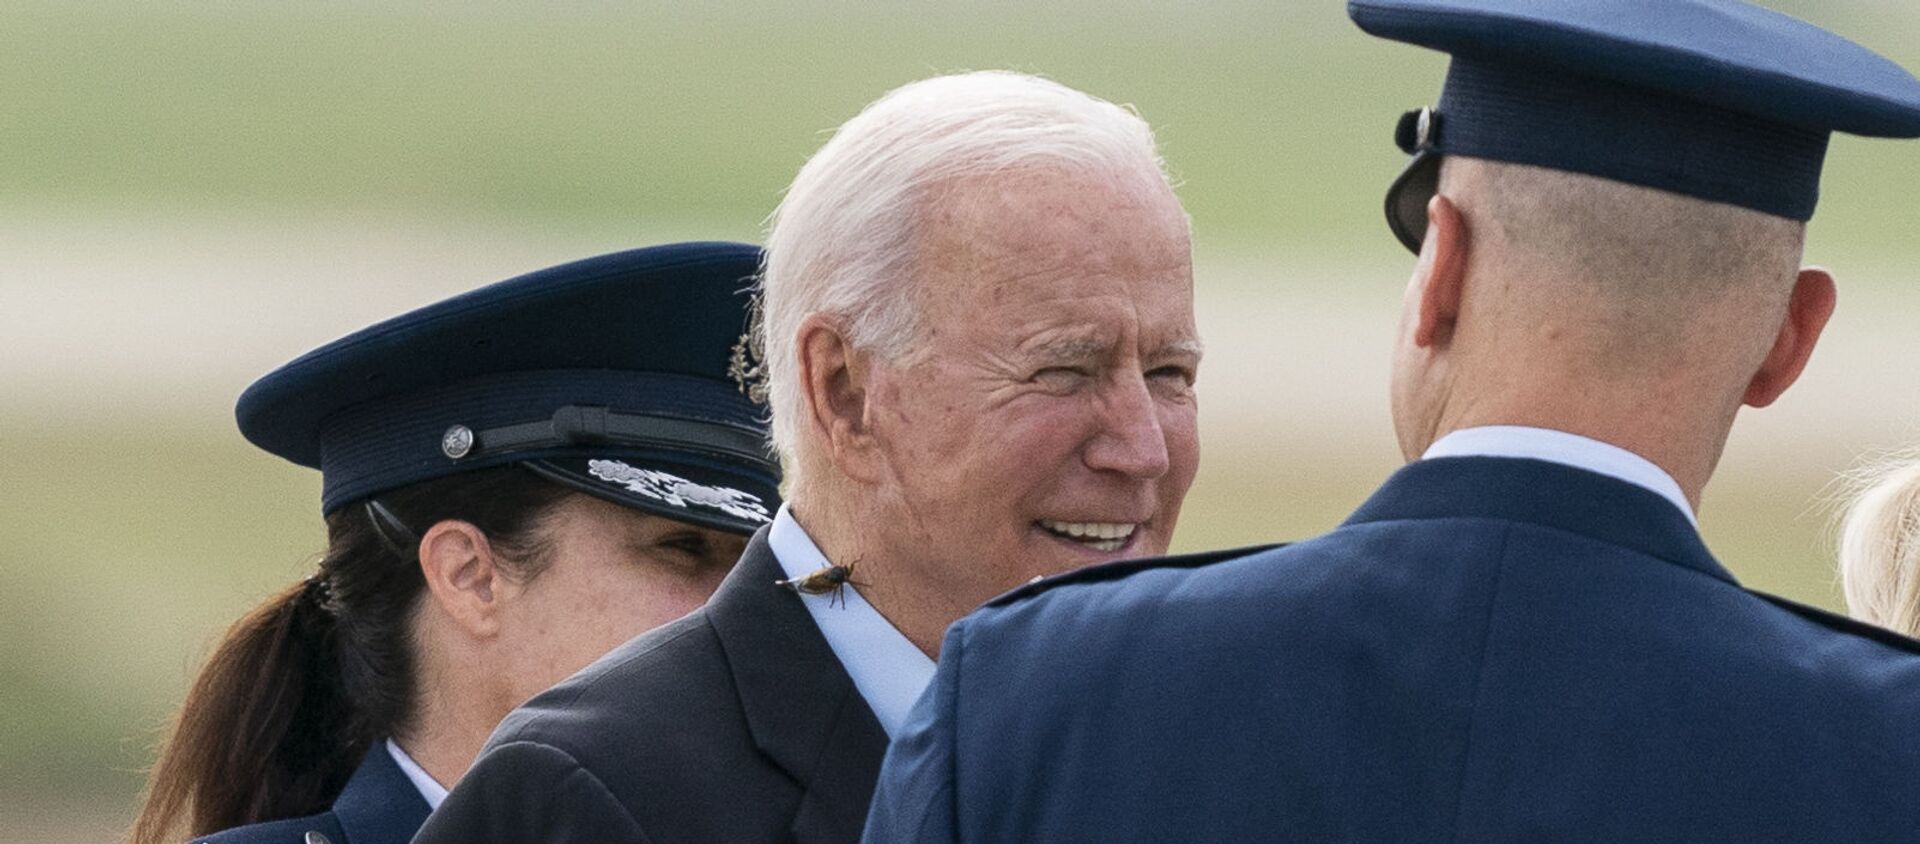 President Joe Biden, with a brood X cicada on his back, walks to board Air Force One upon departure, Wednesday, June 9, 2021, at Andrews Air Force Base, Md. Biden is embarking on the first overseas trip of his term, and is eager to reassert the United States on the world stage, steadying European allies deeply shaken by his predecessor and pushing democracy as the only bulwark to the rising forces of authoritarianism. - Sputnik International, 1920, 09.06.2021